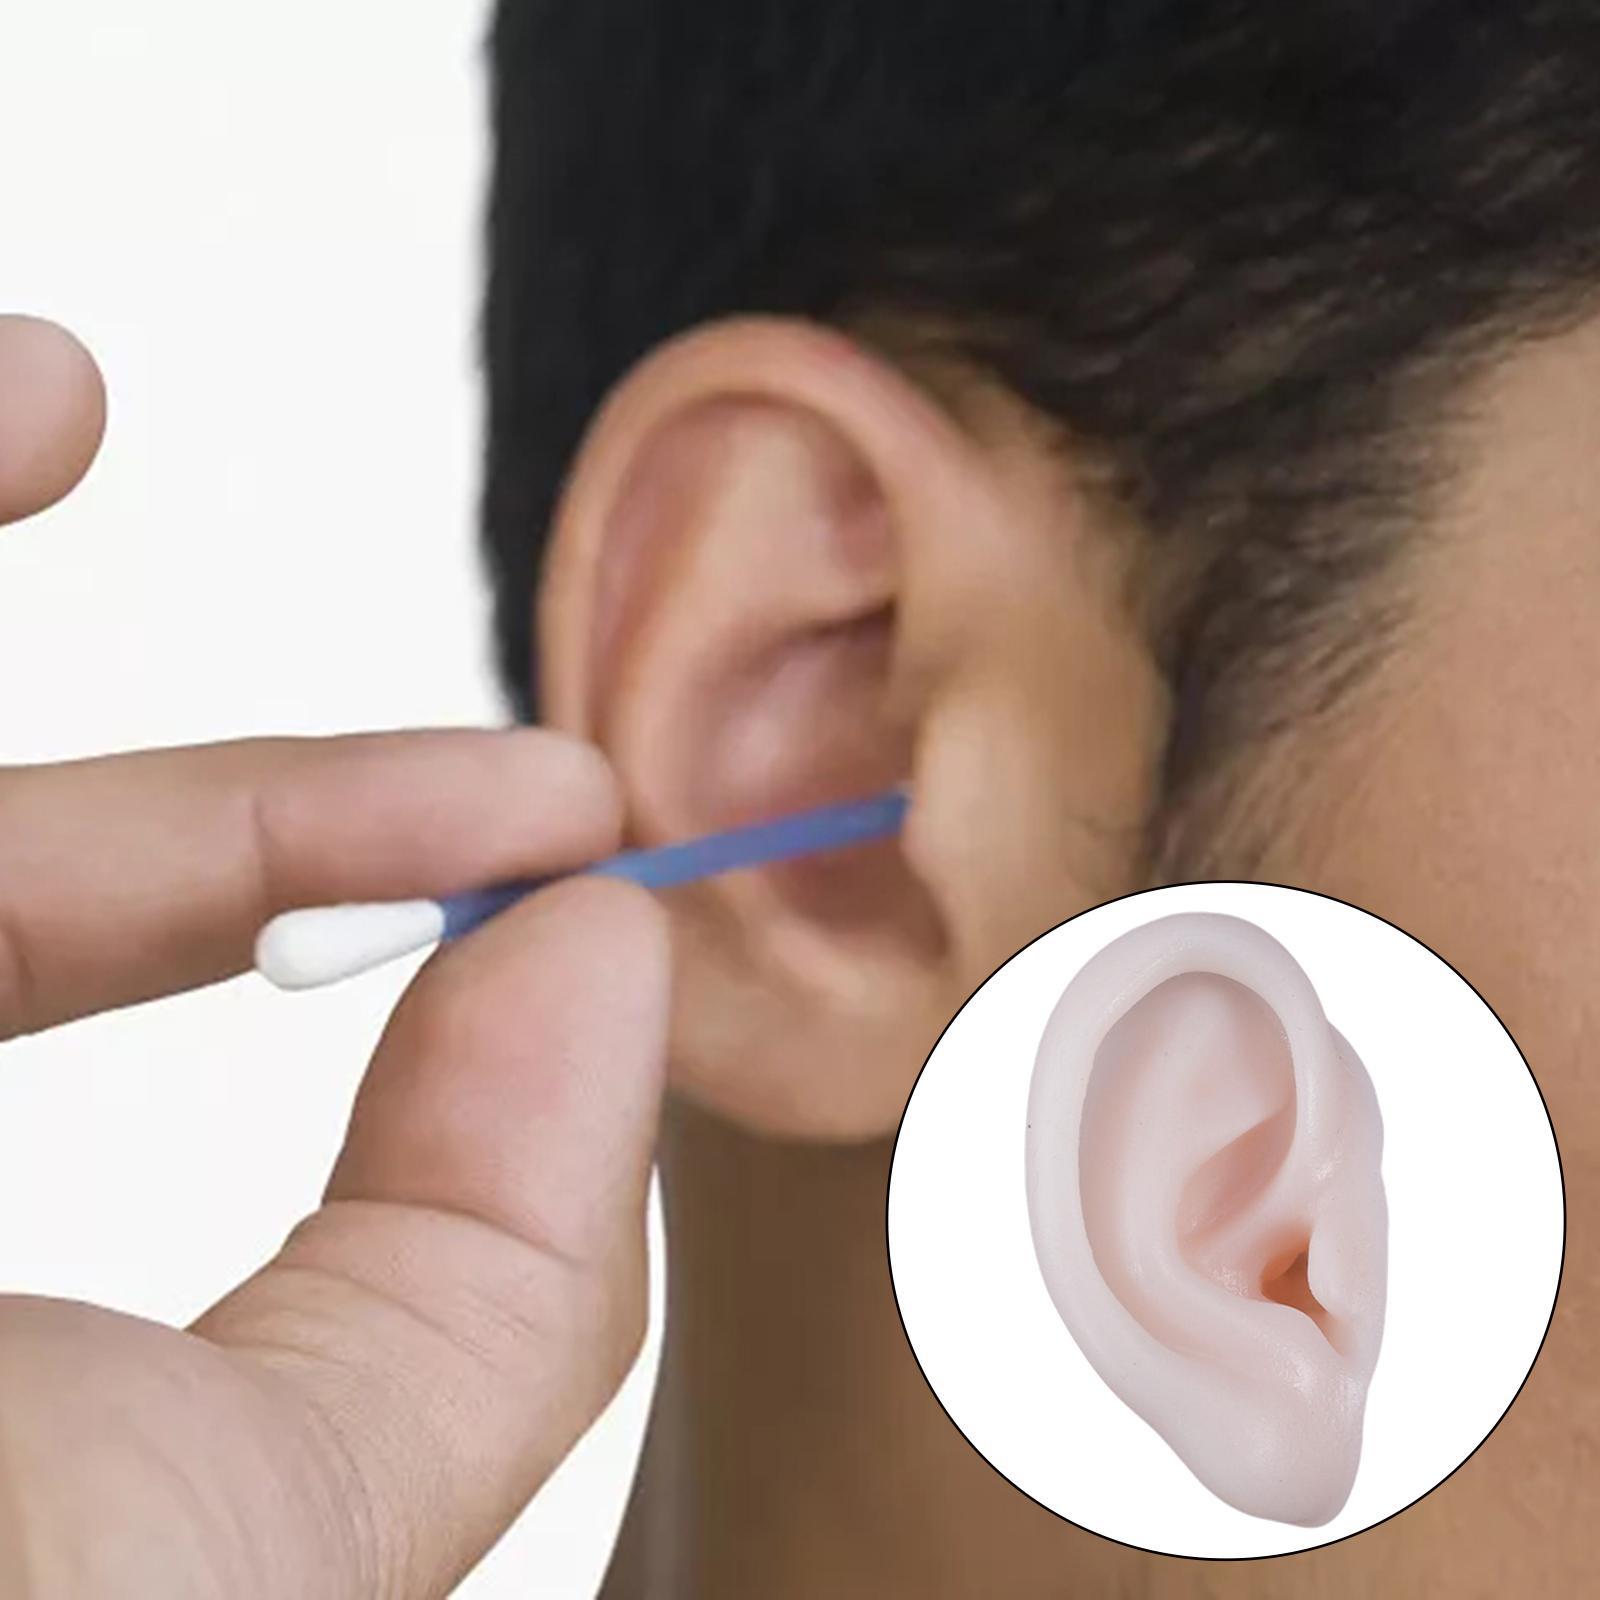 Ear Model, Soft Silicone, Props Teaching Tools Acupuncture Practice Model for Educational